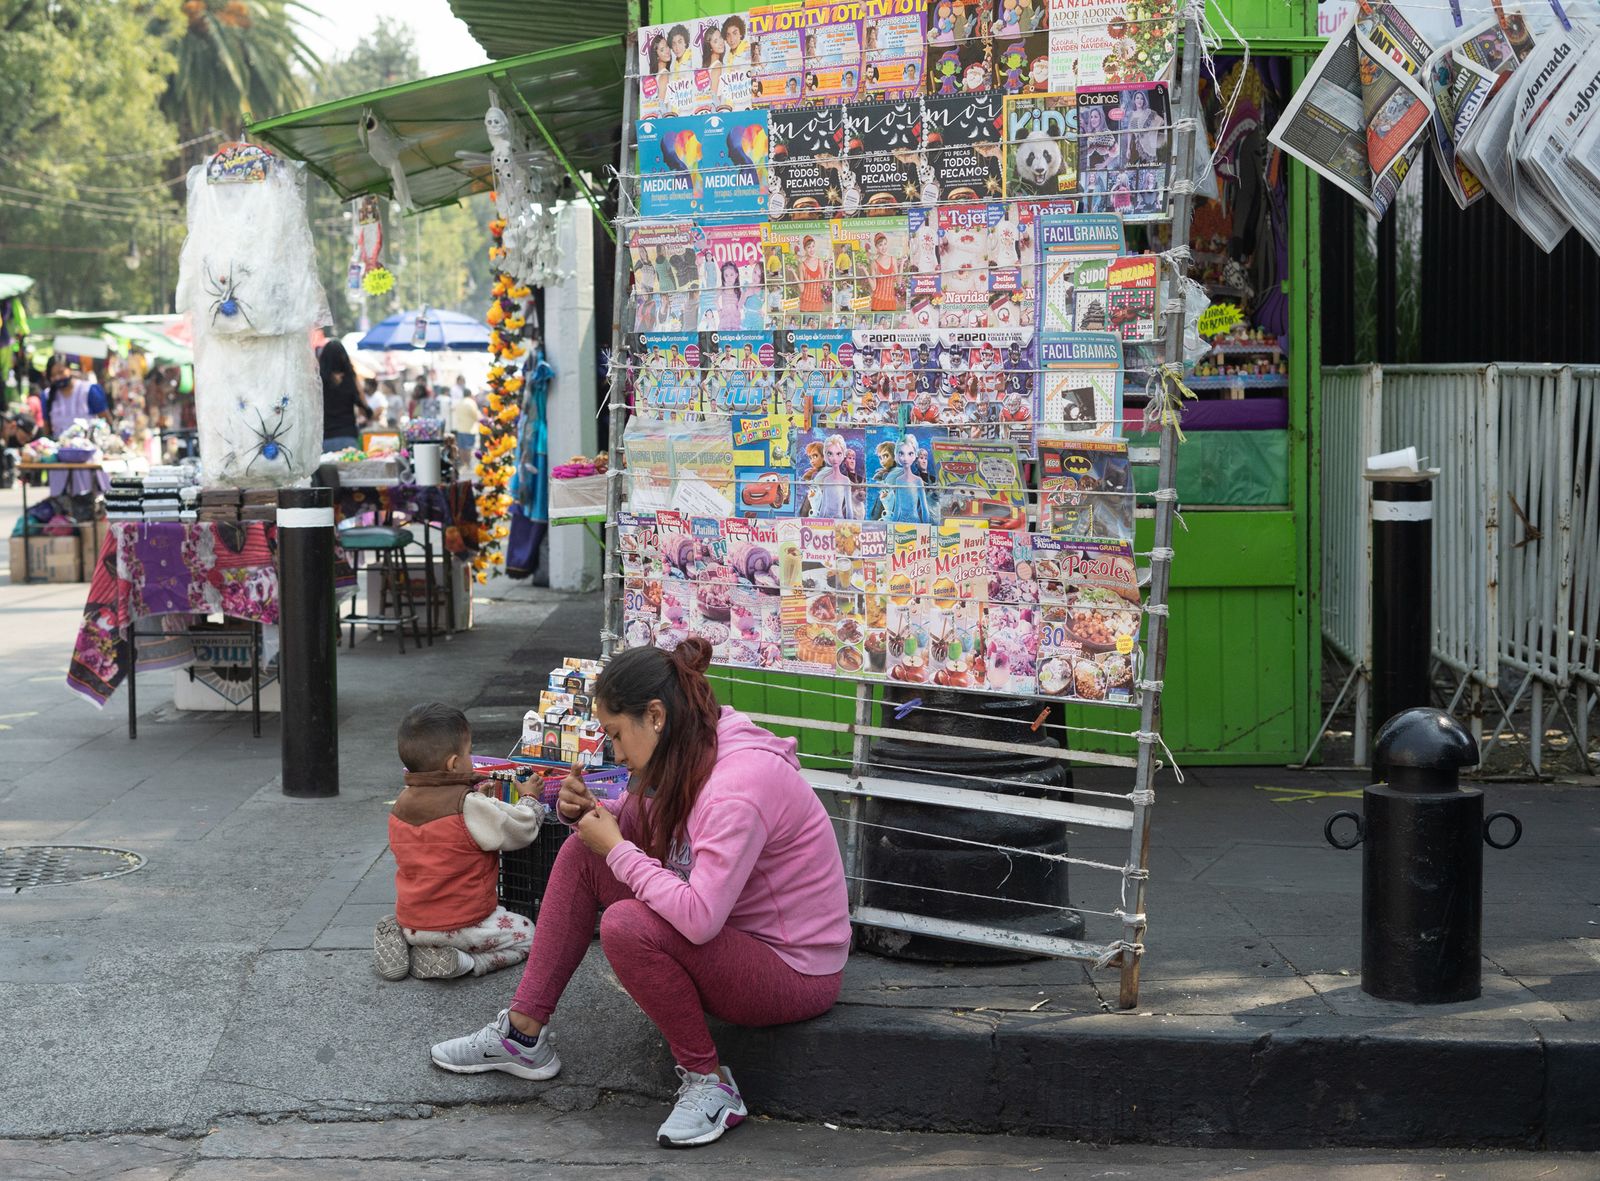 © Roxanne Munson - A woman sitting on a curb selling magazines with a little boy next to her playing.